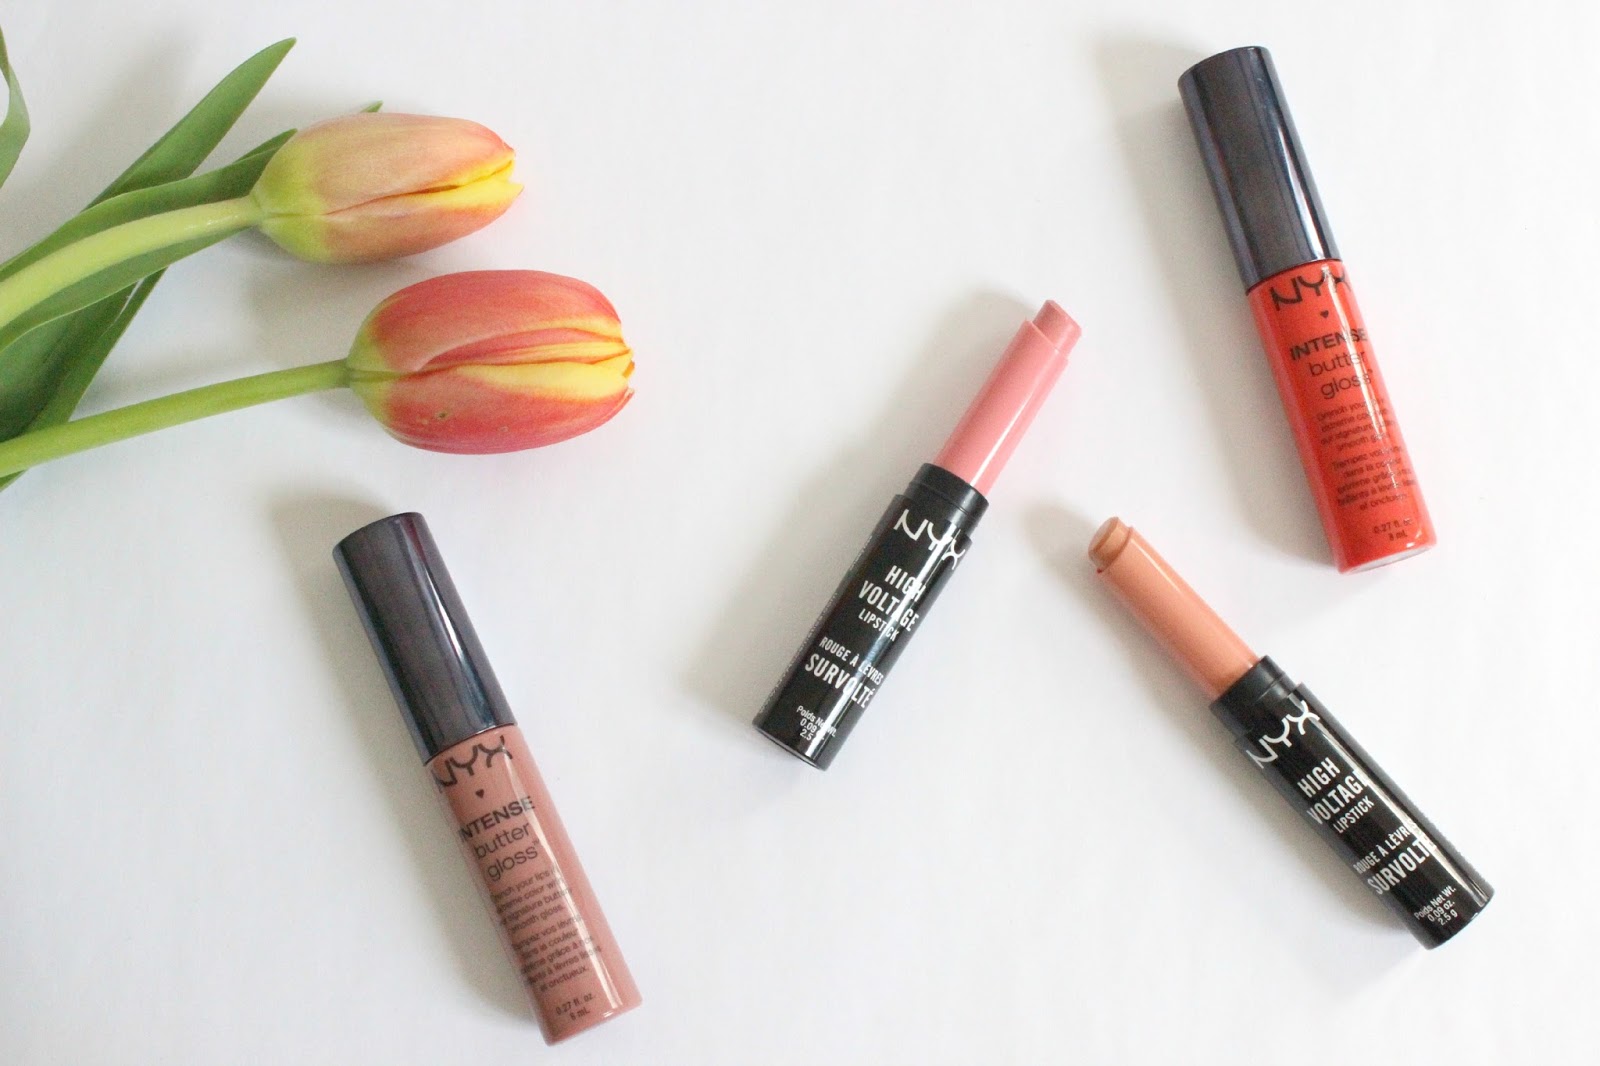 New NYX lip launches spring 2015. NYX Intense Butter Gloss and NYX High Voltage Lipstick